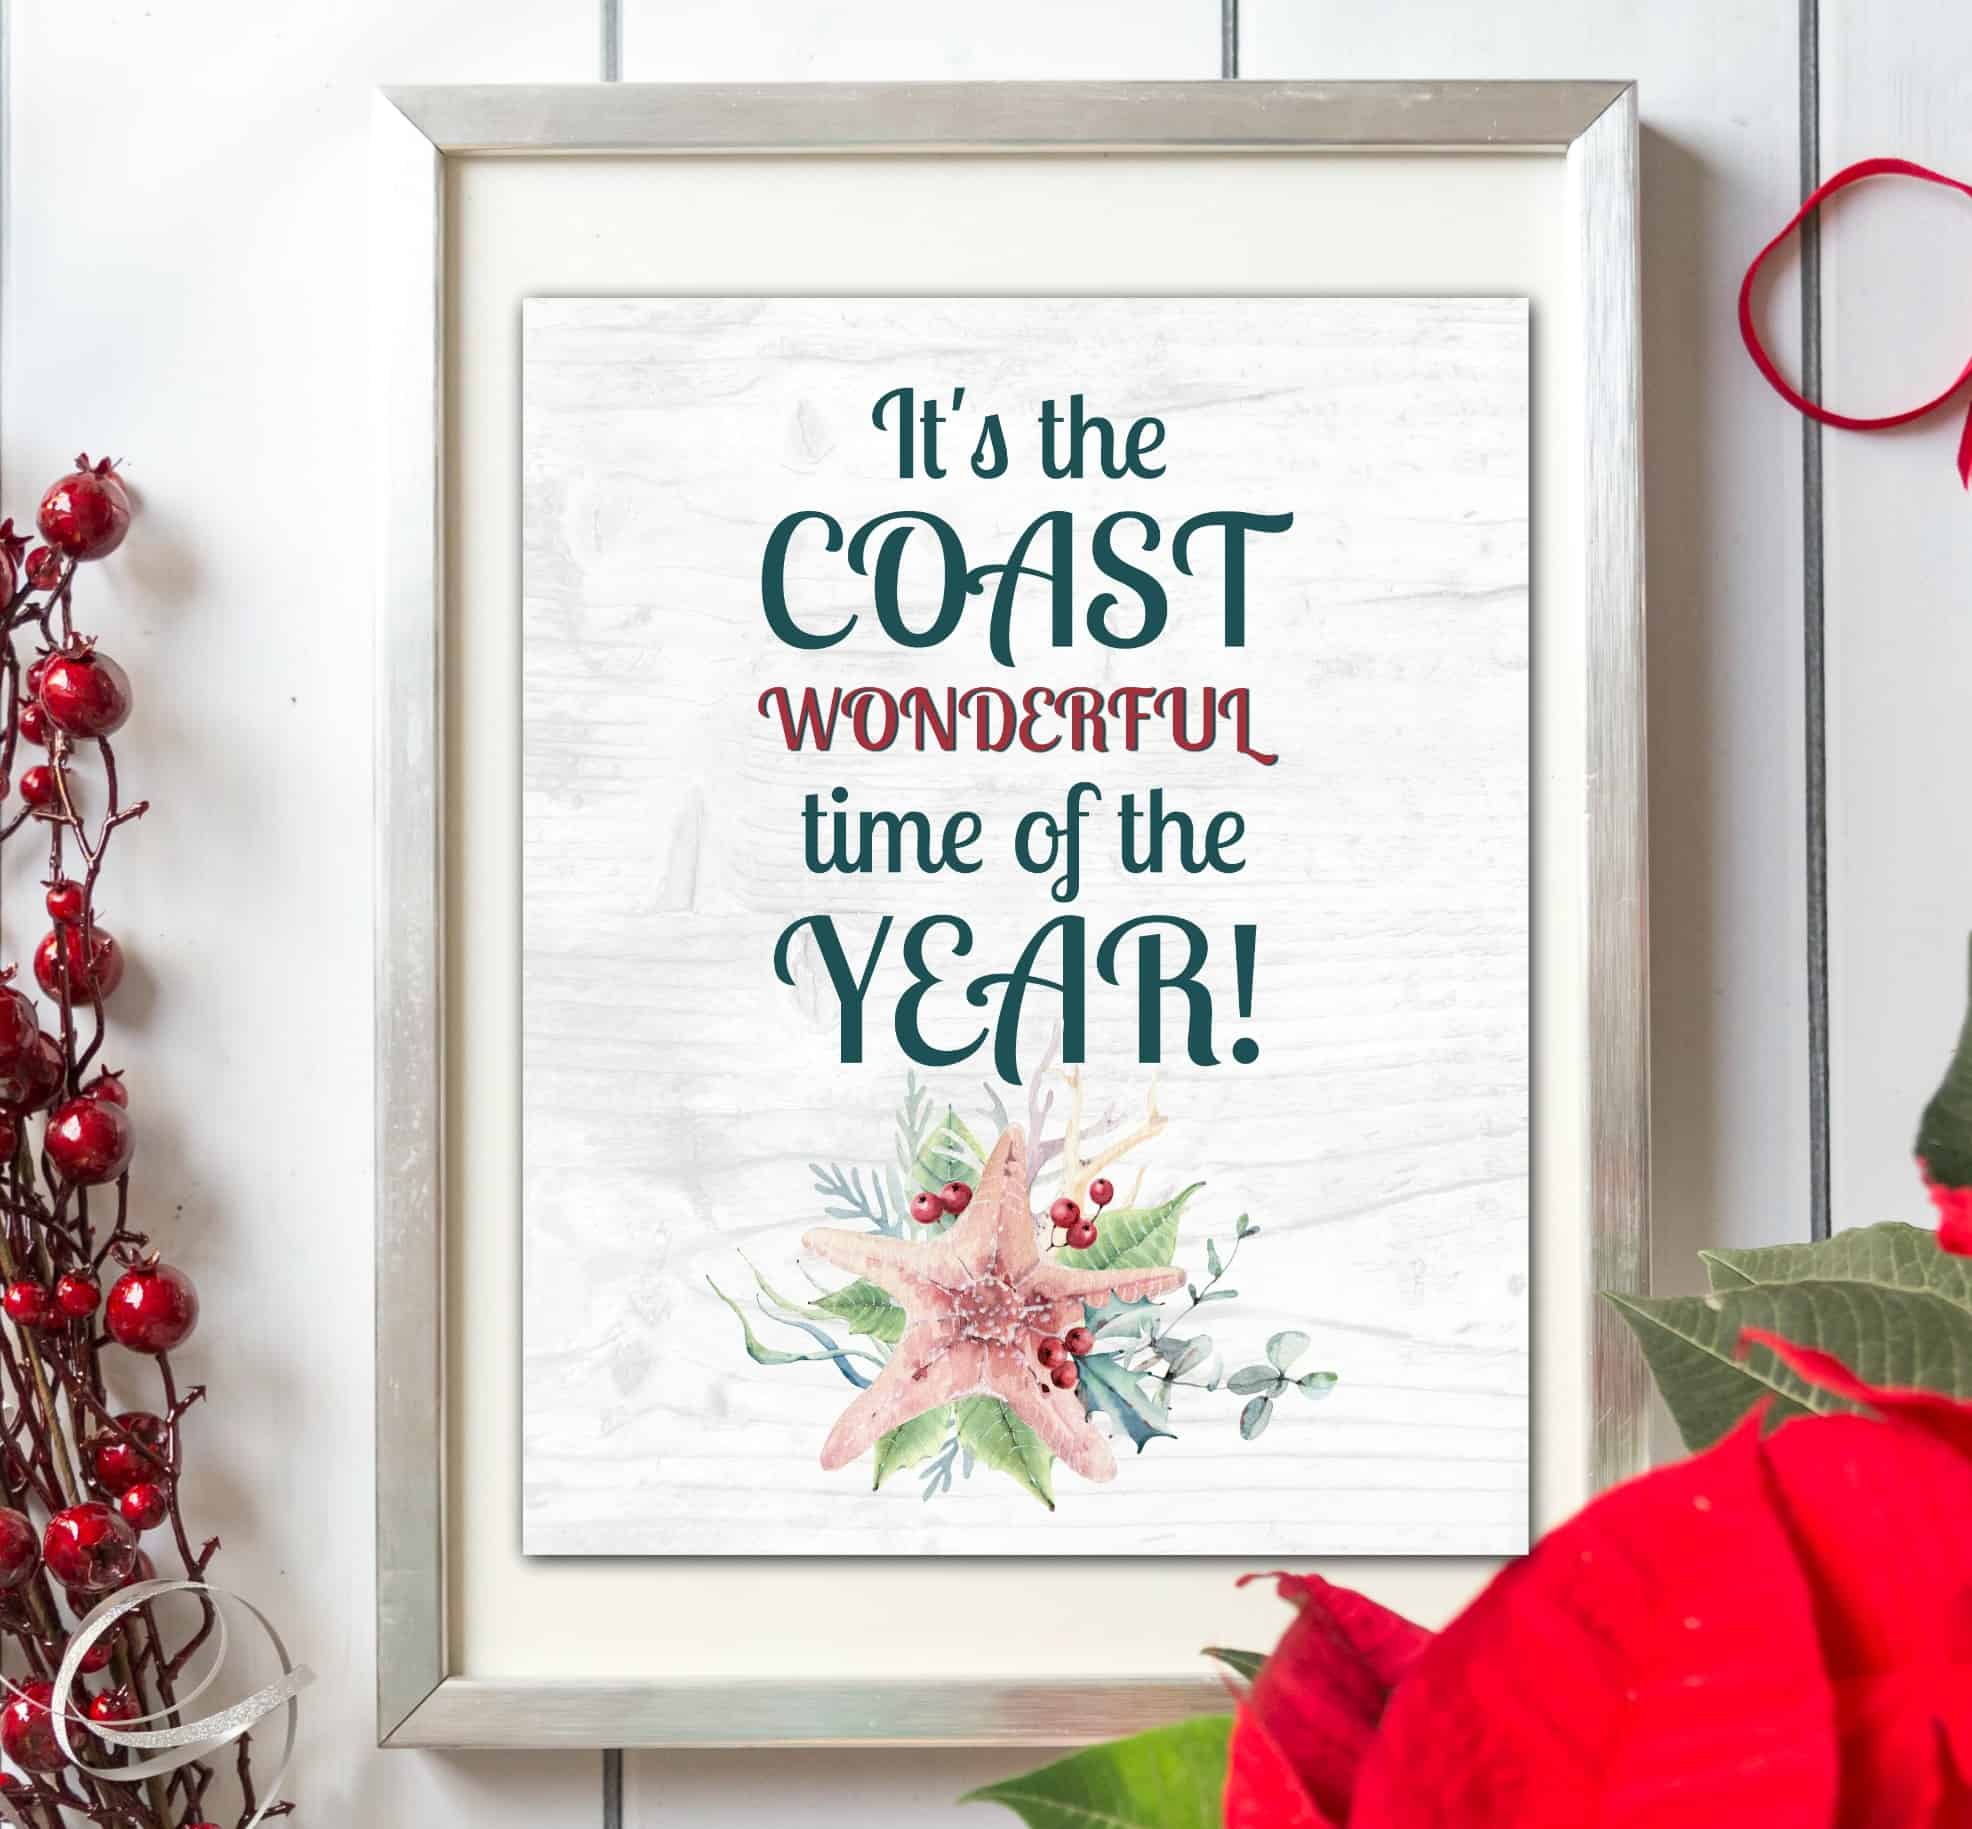 best of my wee abode 2018 Christmas printable in frame with seasonal elements